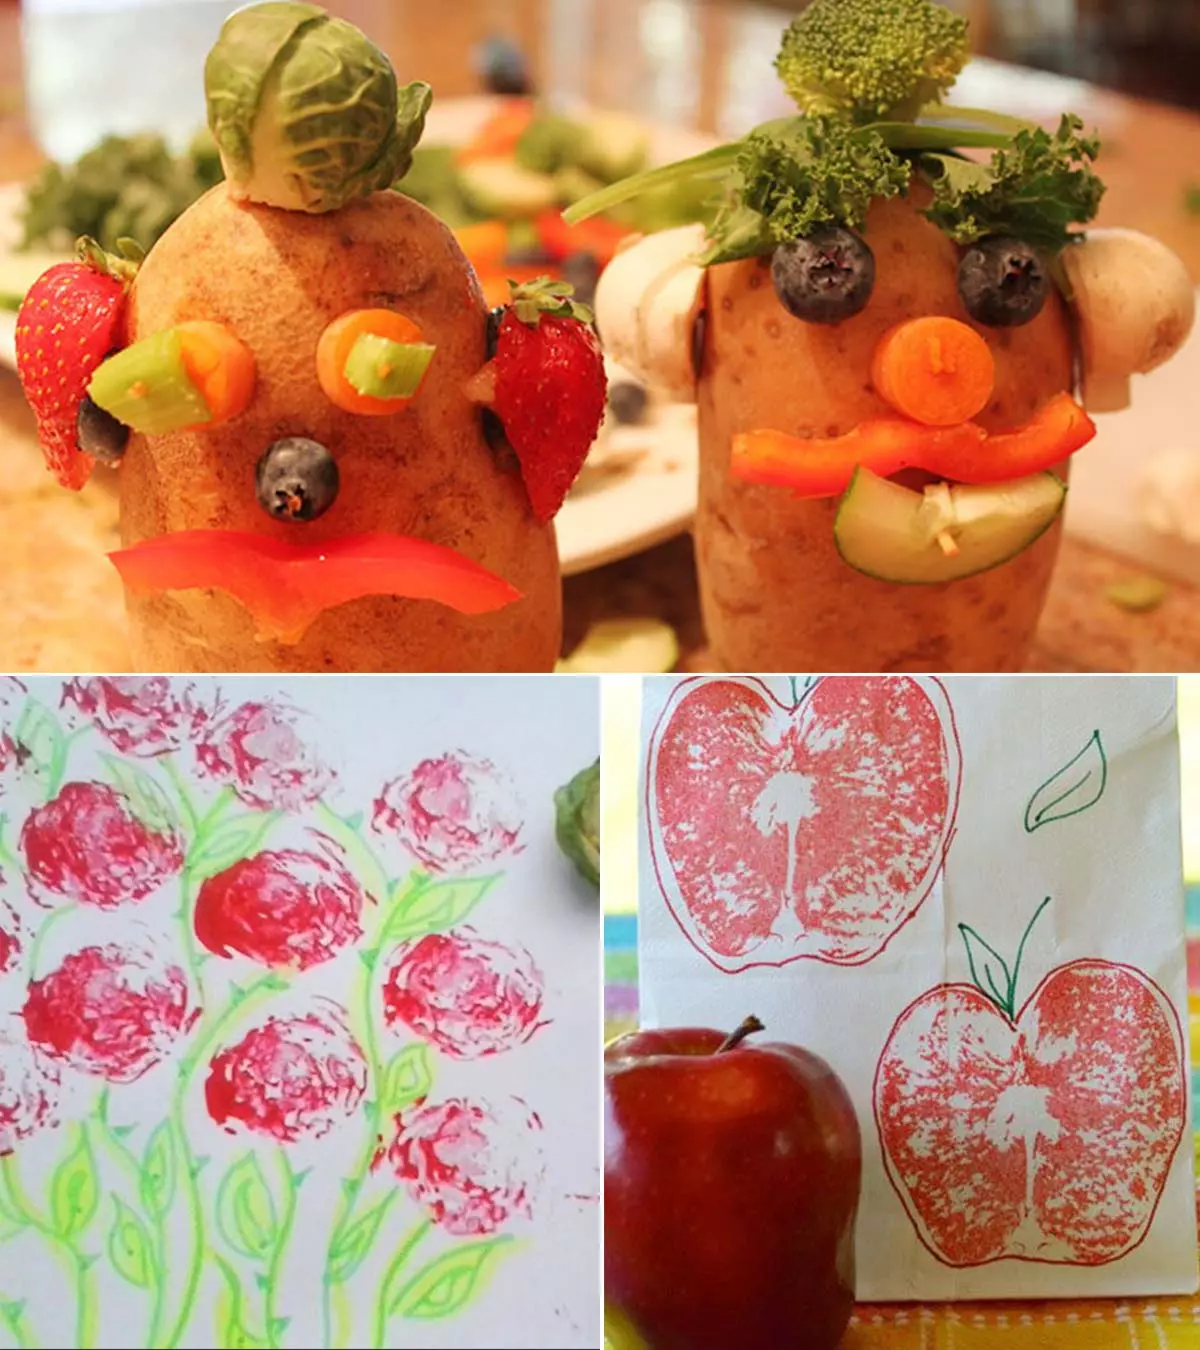 red fruits and vegetables for kids